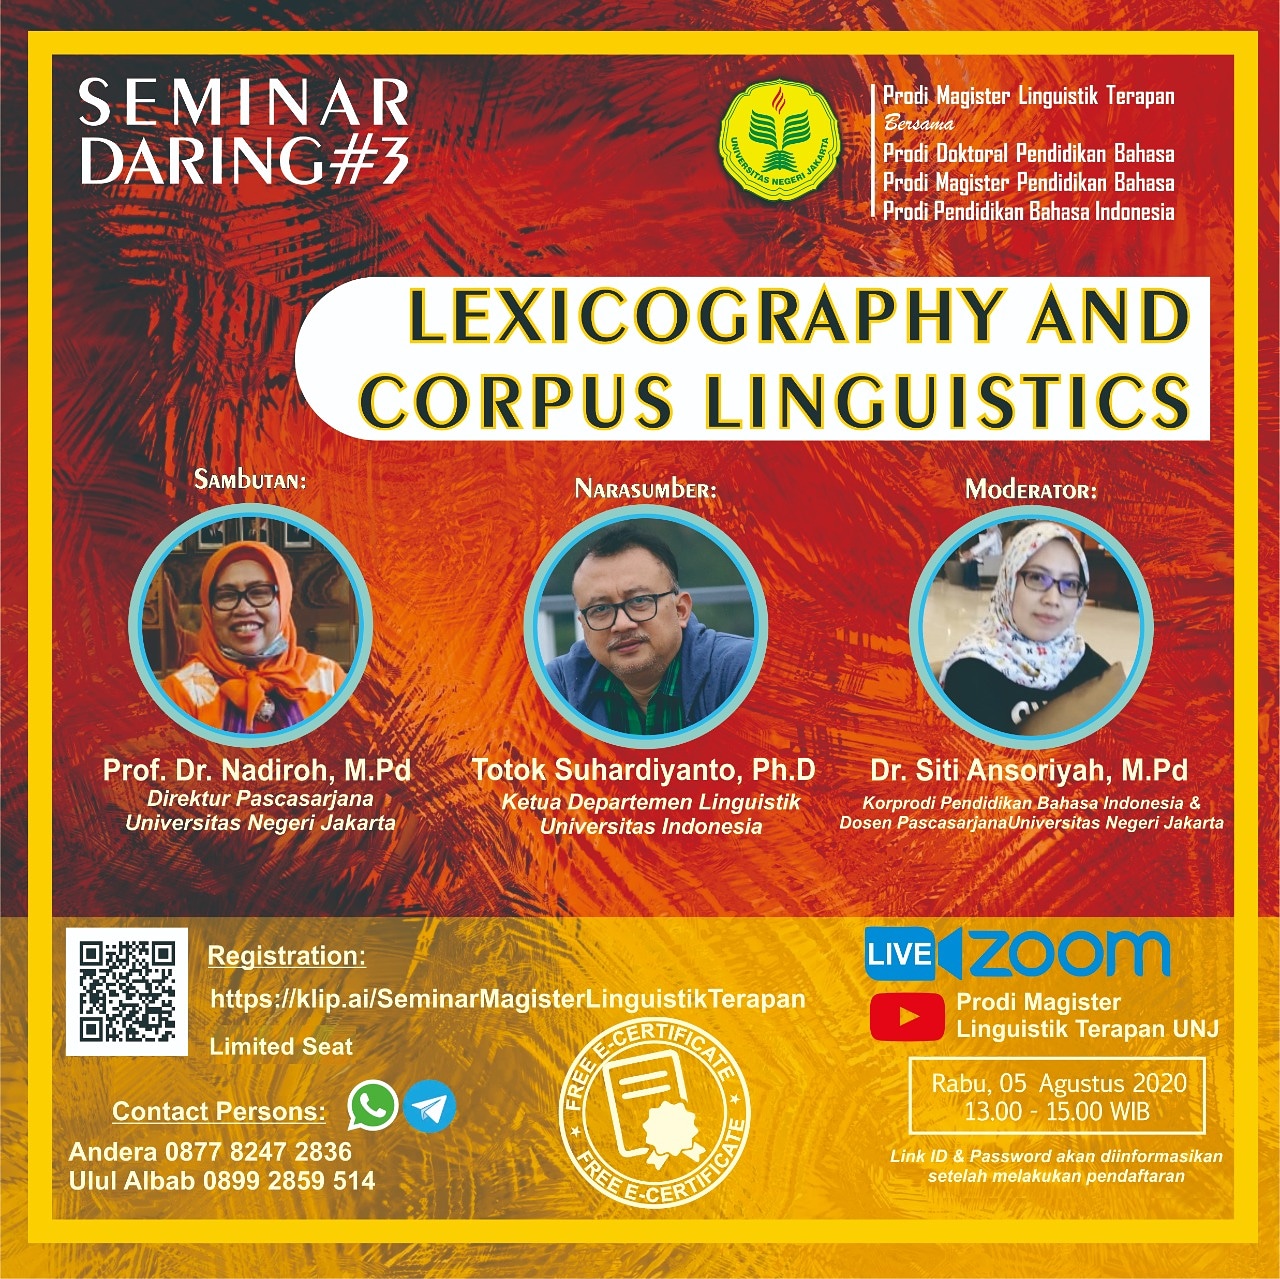 Lexicography and Corpus Linguistics